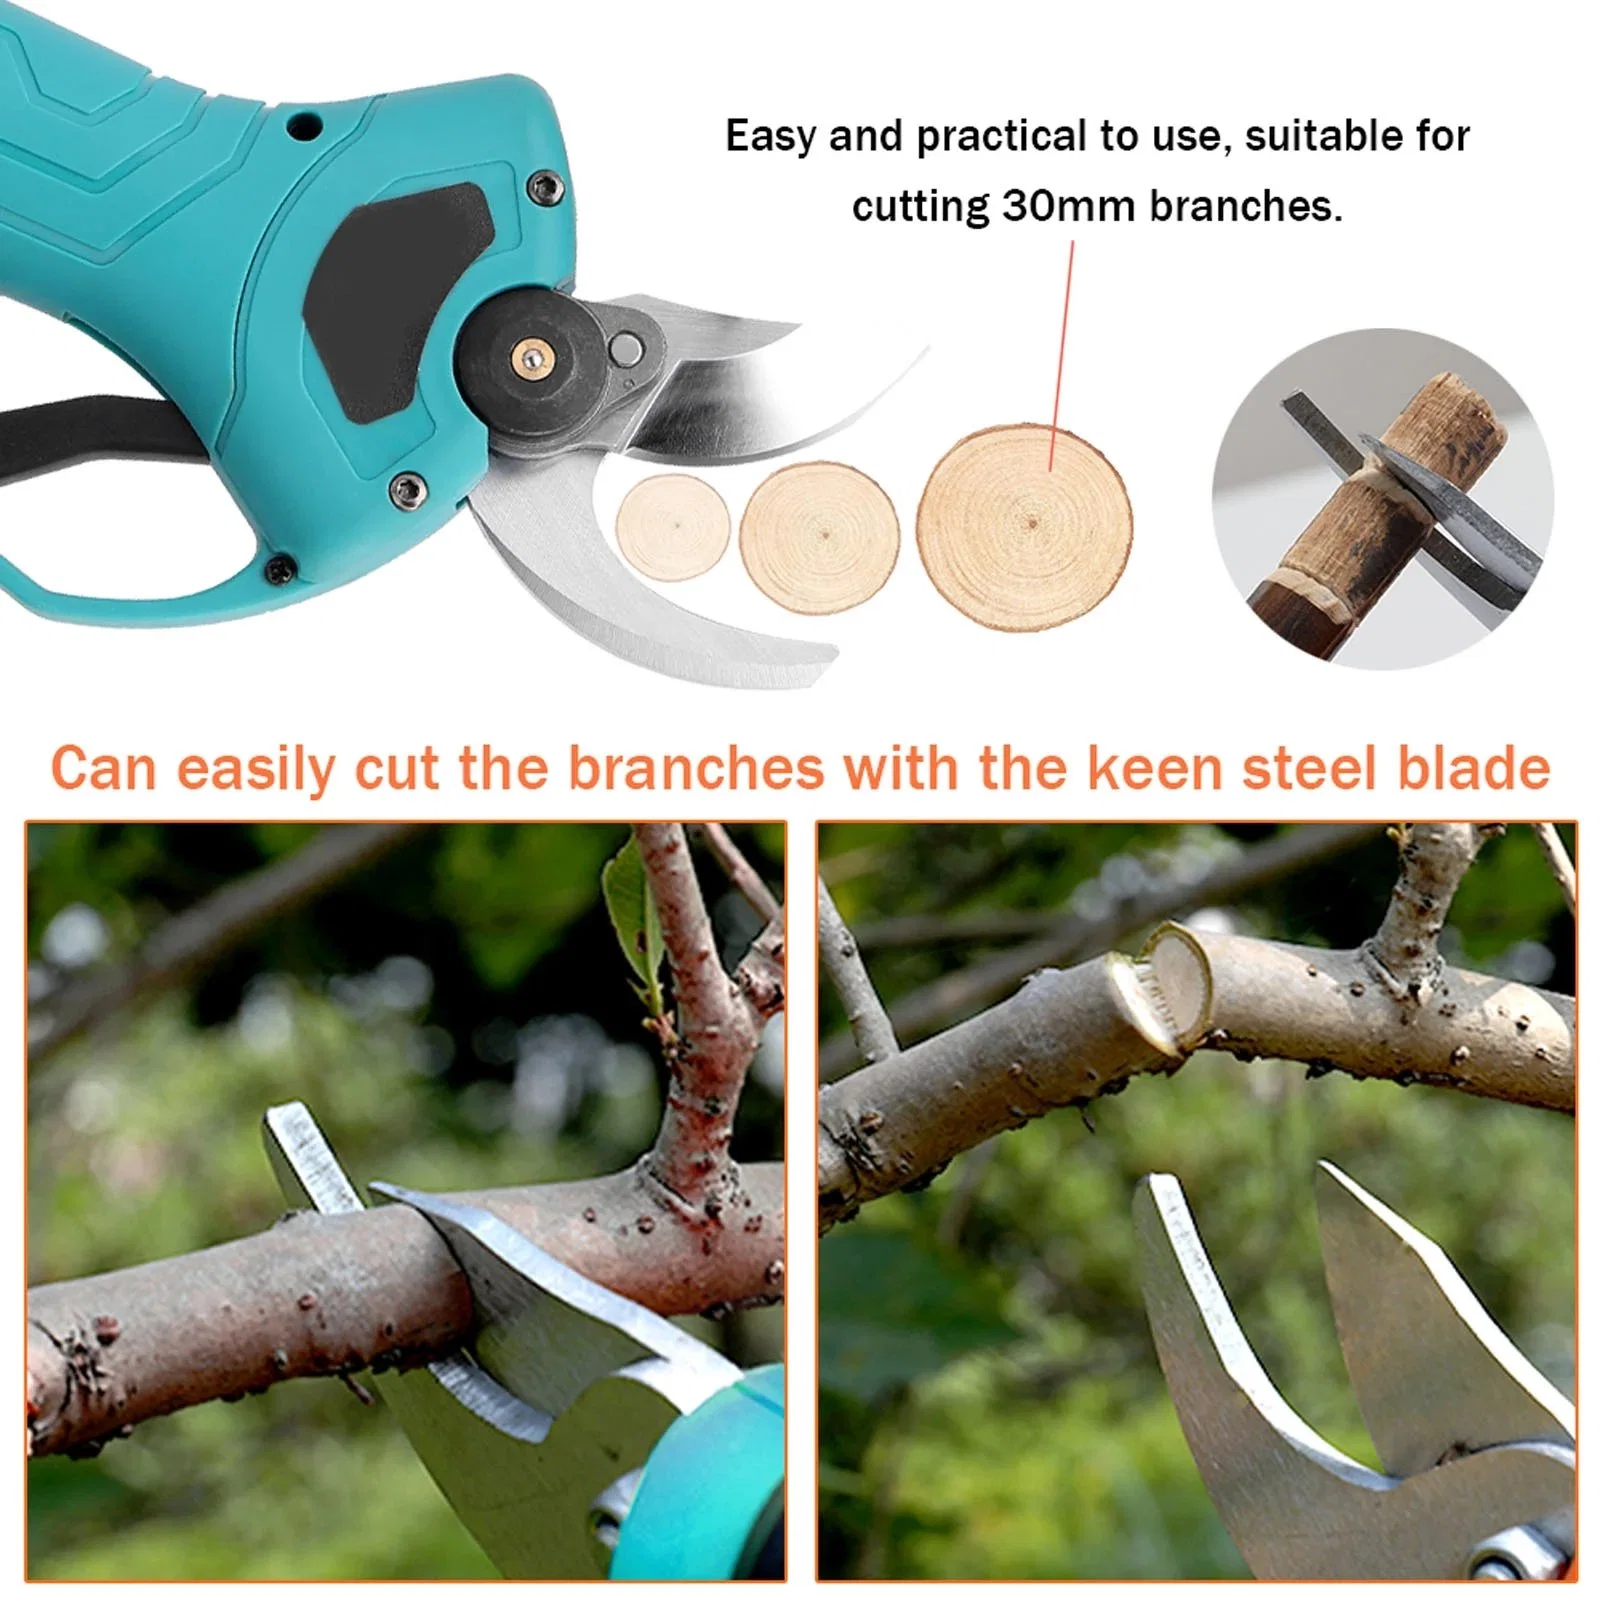 Sk5 Cordless Pruner Cutting-Blade 30mm Electric Pruning Shear Accessory Efficient Fruit Tree Bonsai Pruning Branches Garden Tool